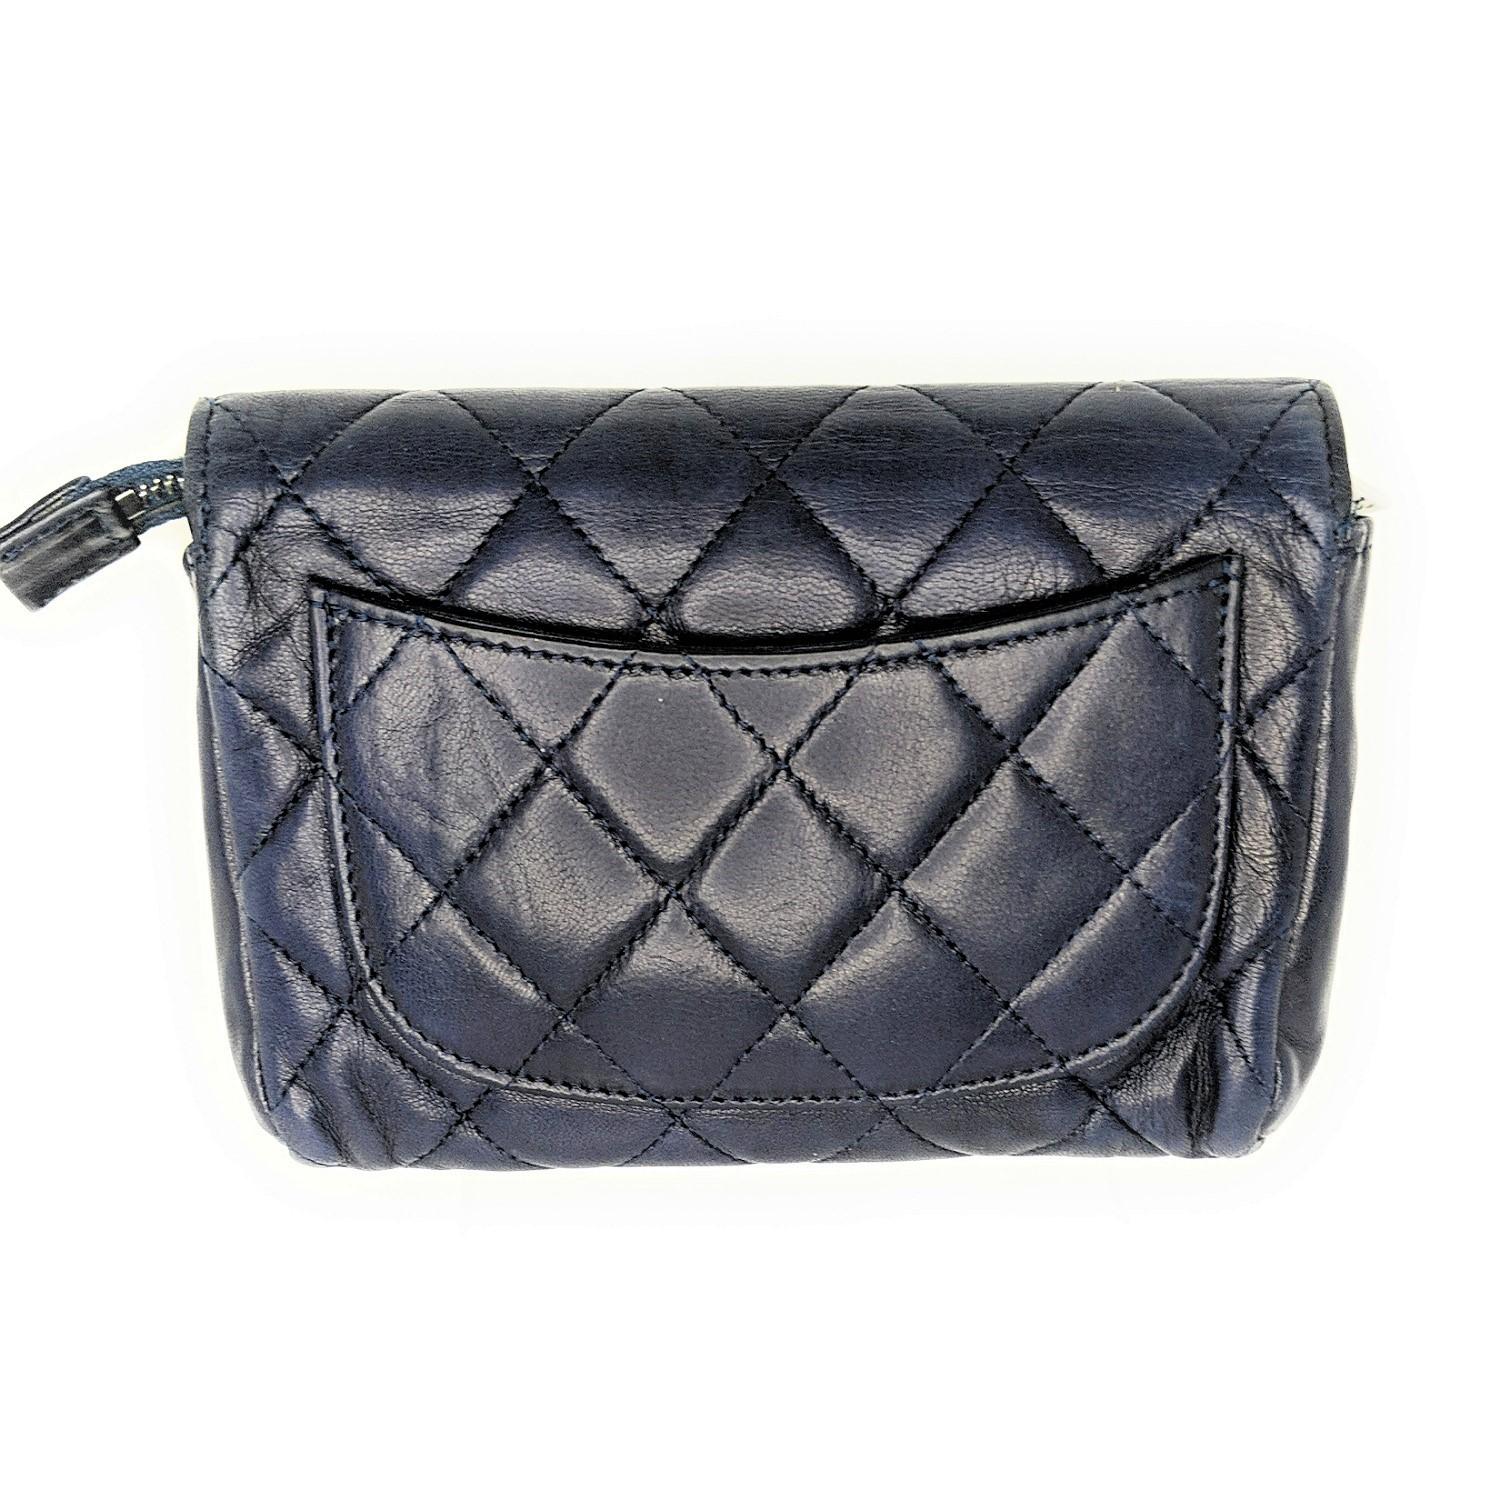 This stylish cosmetics case is crafted of diamond quilted lambskin leather in navy with a small silver Chanel CC logo. The top flap and zipper opens to a nylon compartment with room for all your cosmetic needs and a mirror on the inner side of the